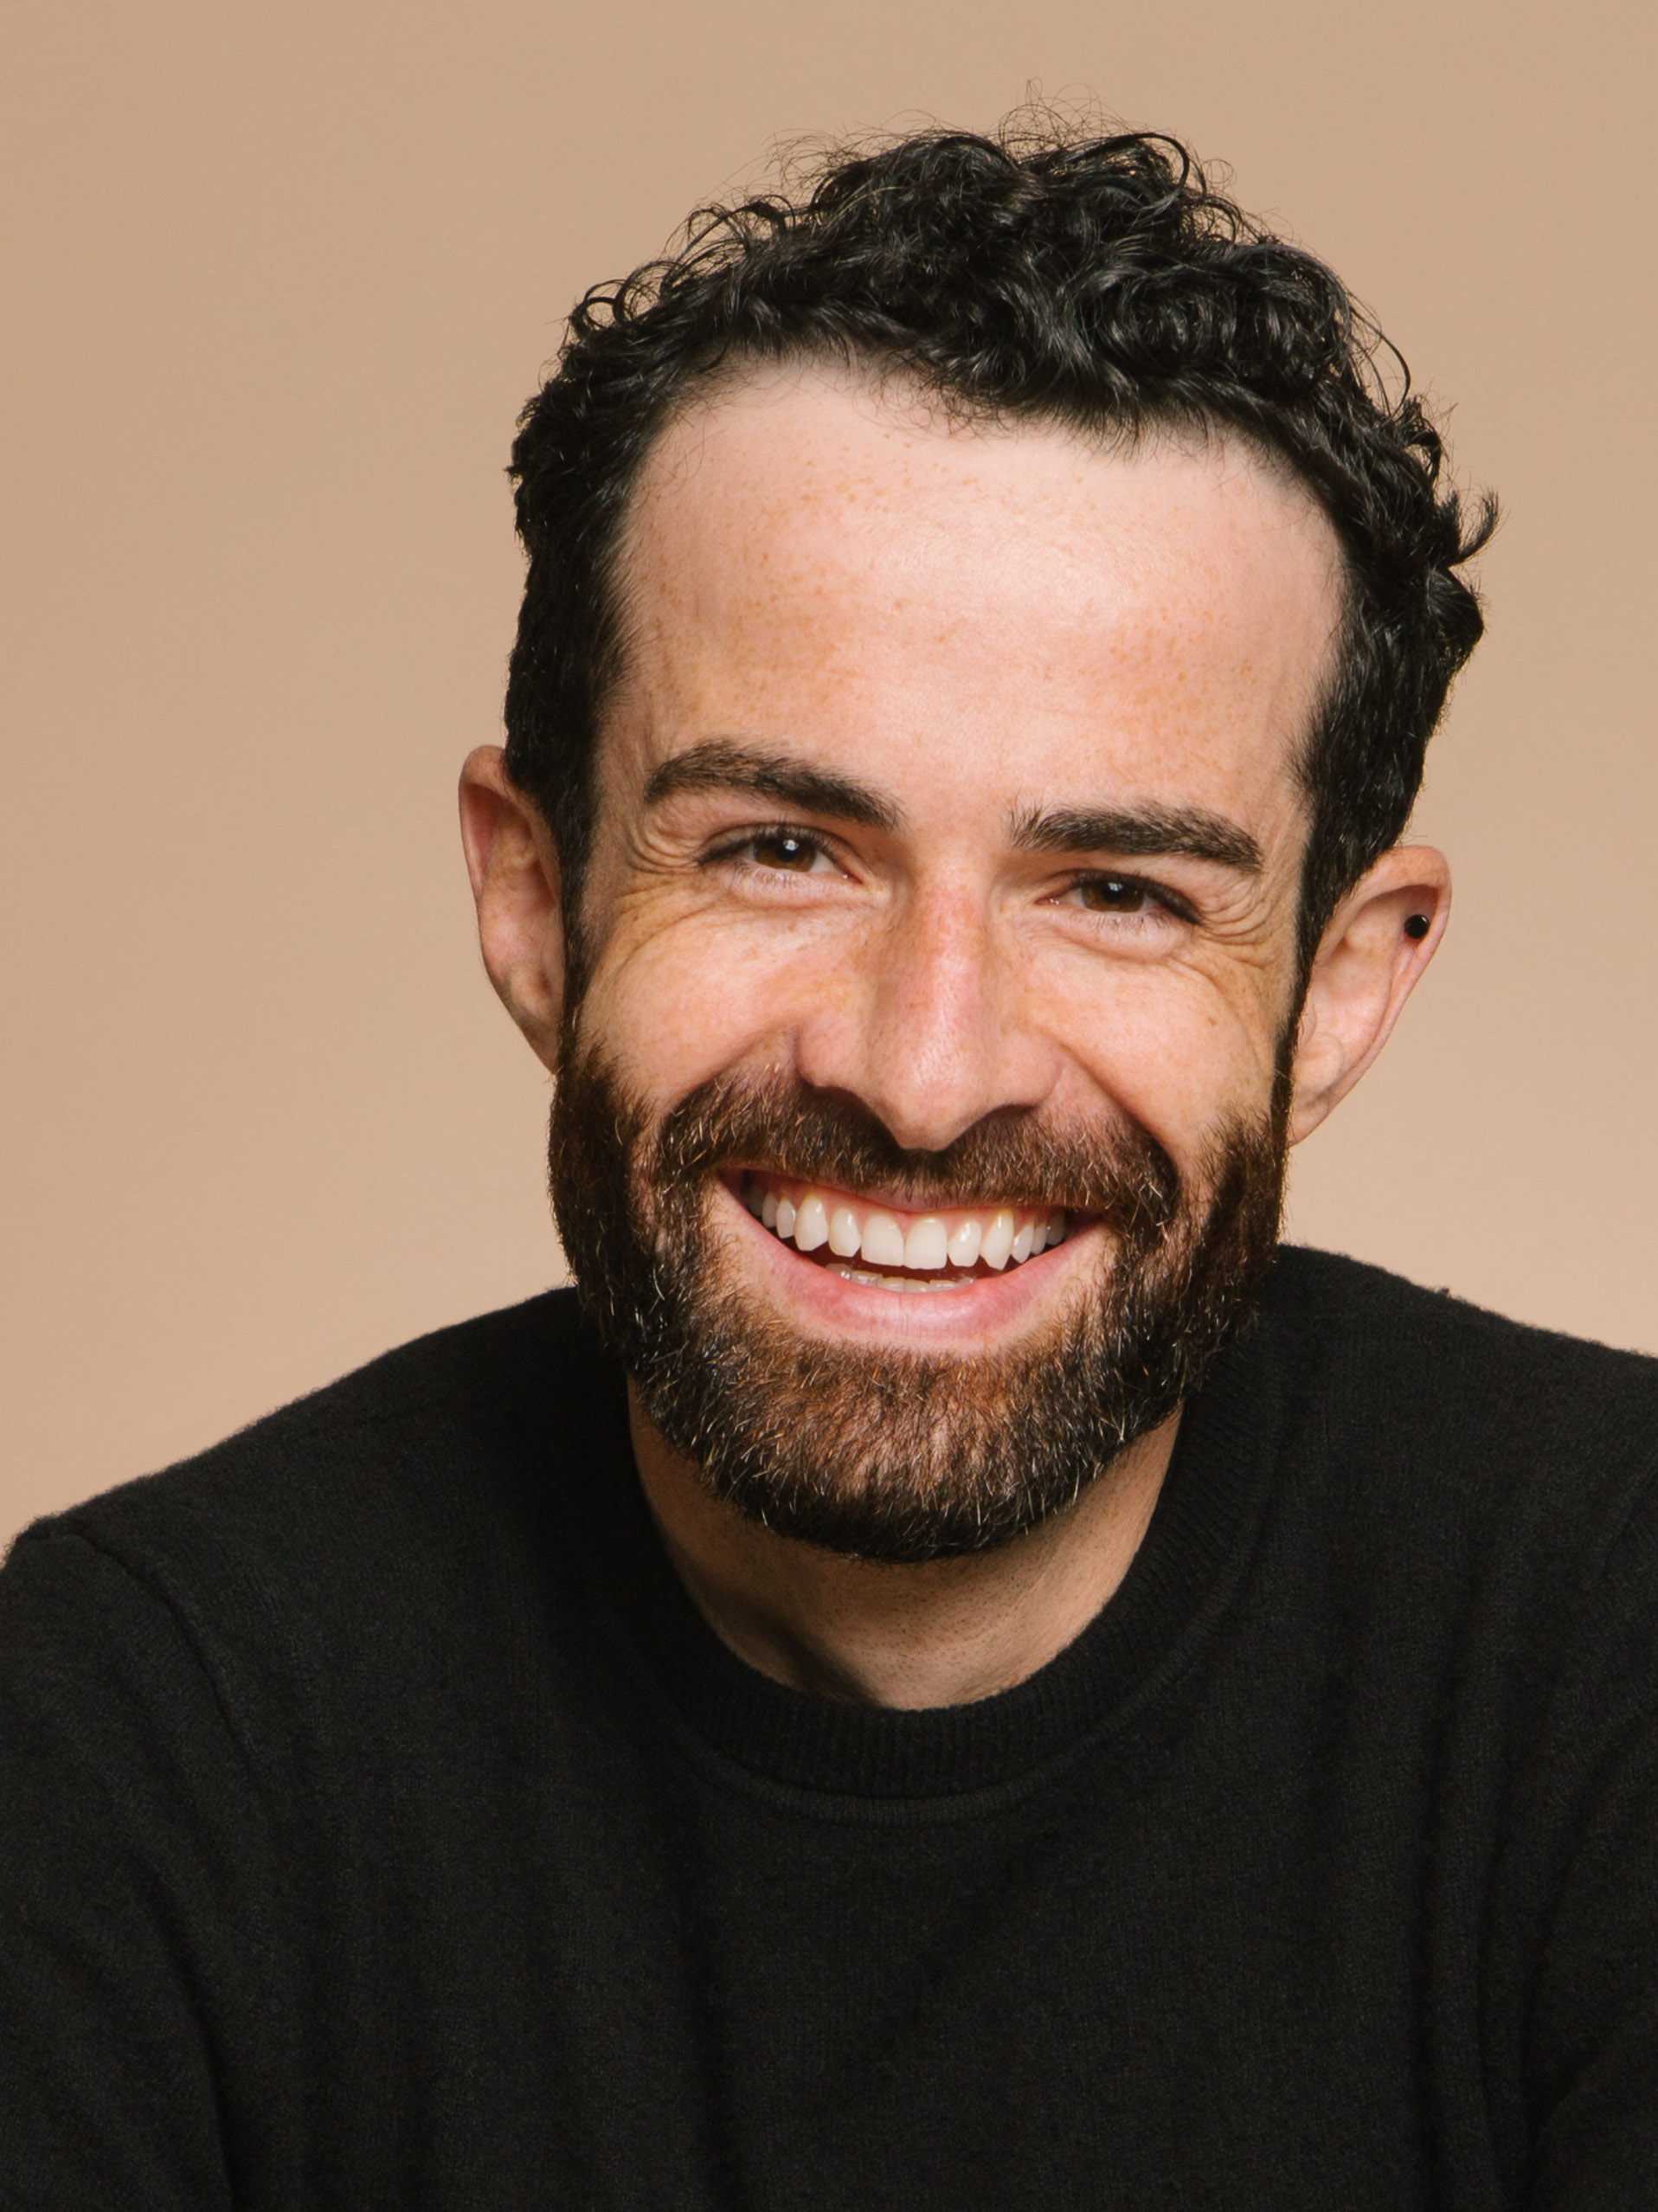 A portrait of a cheerful man with curly hair and beard, smiling widely, showing white teeth. He has dark, short, curly hair, and a groomed beard. Freckles are visible on his face and he's wearing a black crew neck sweater. The background is a warm, neutral tone.